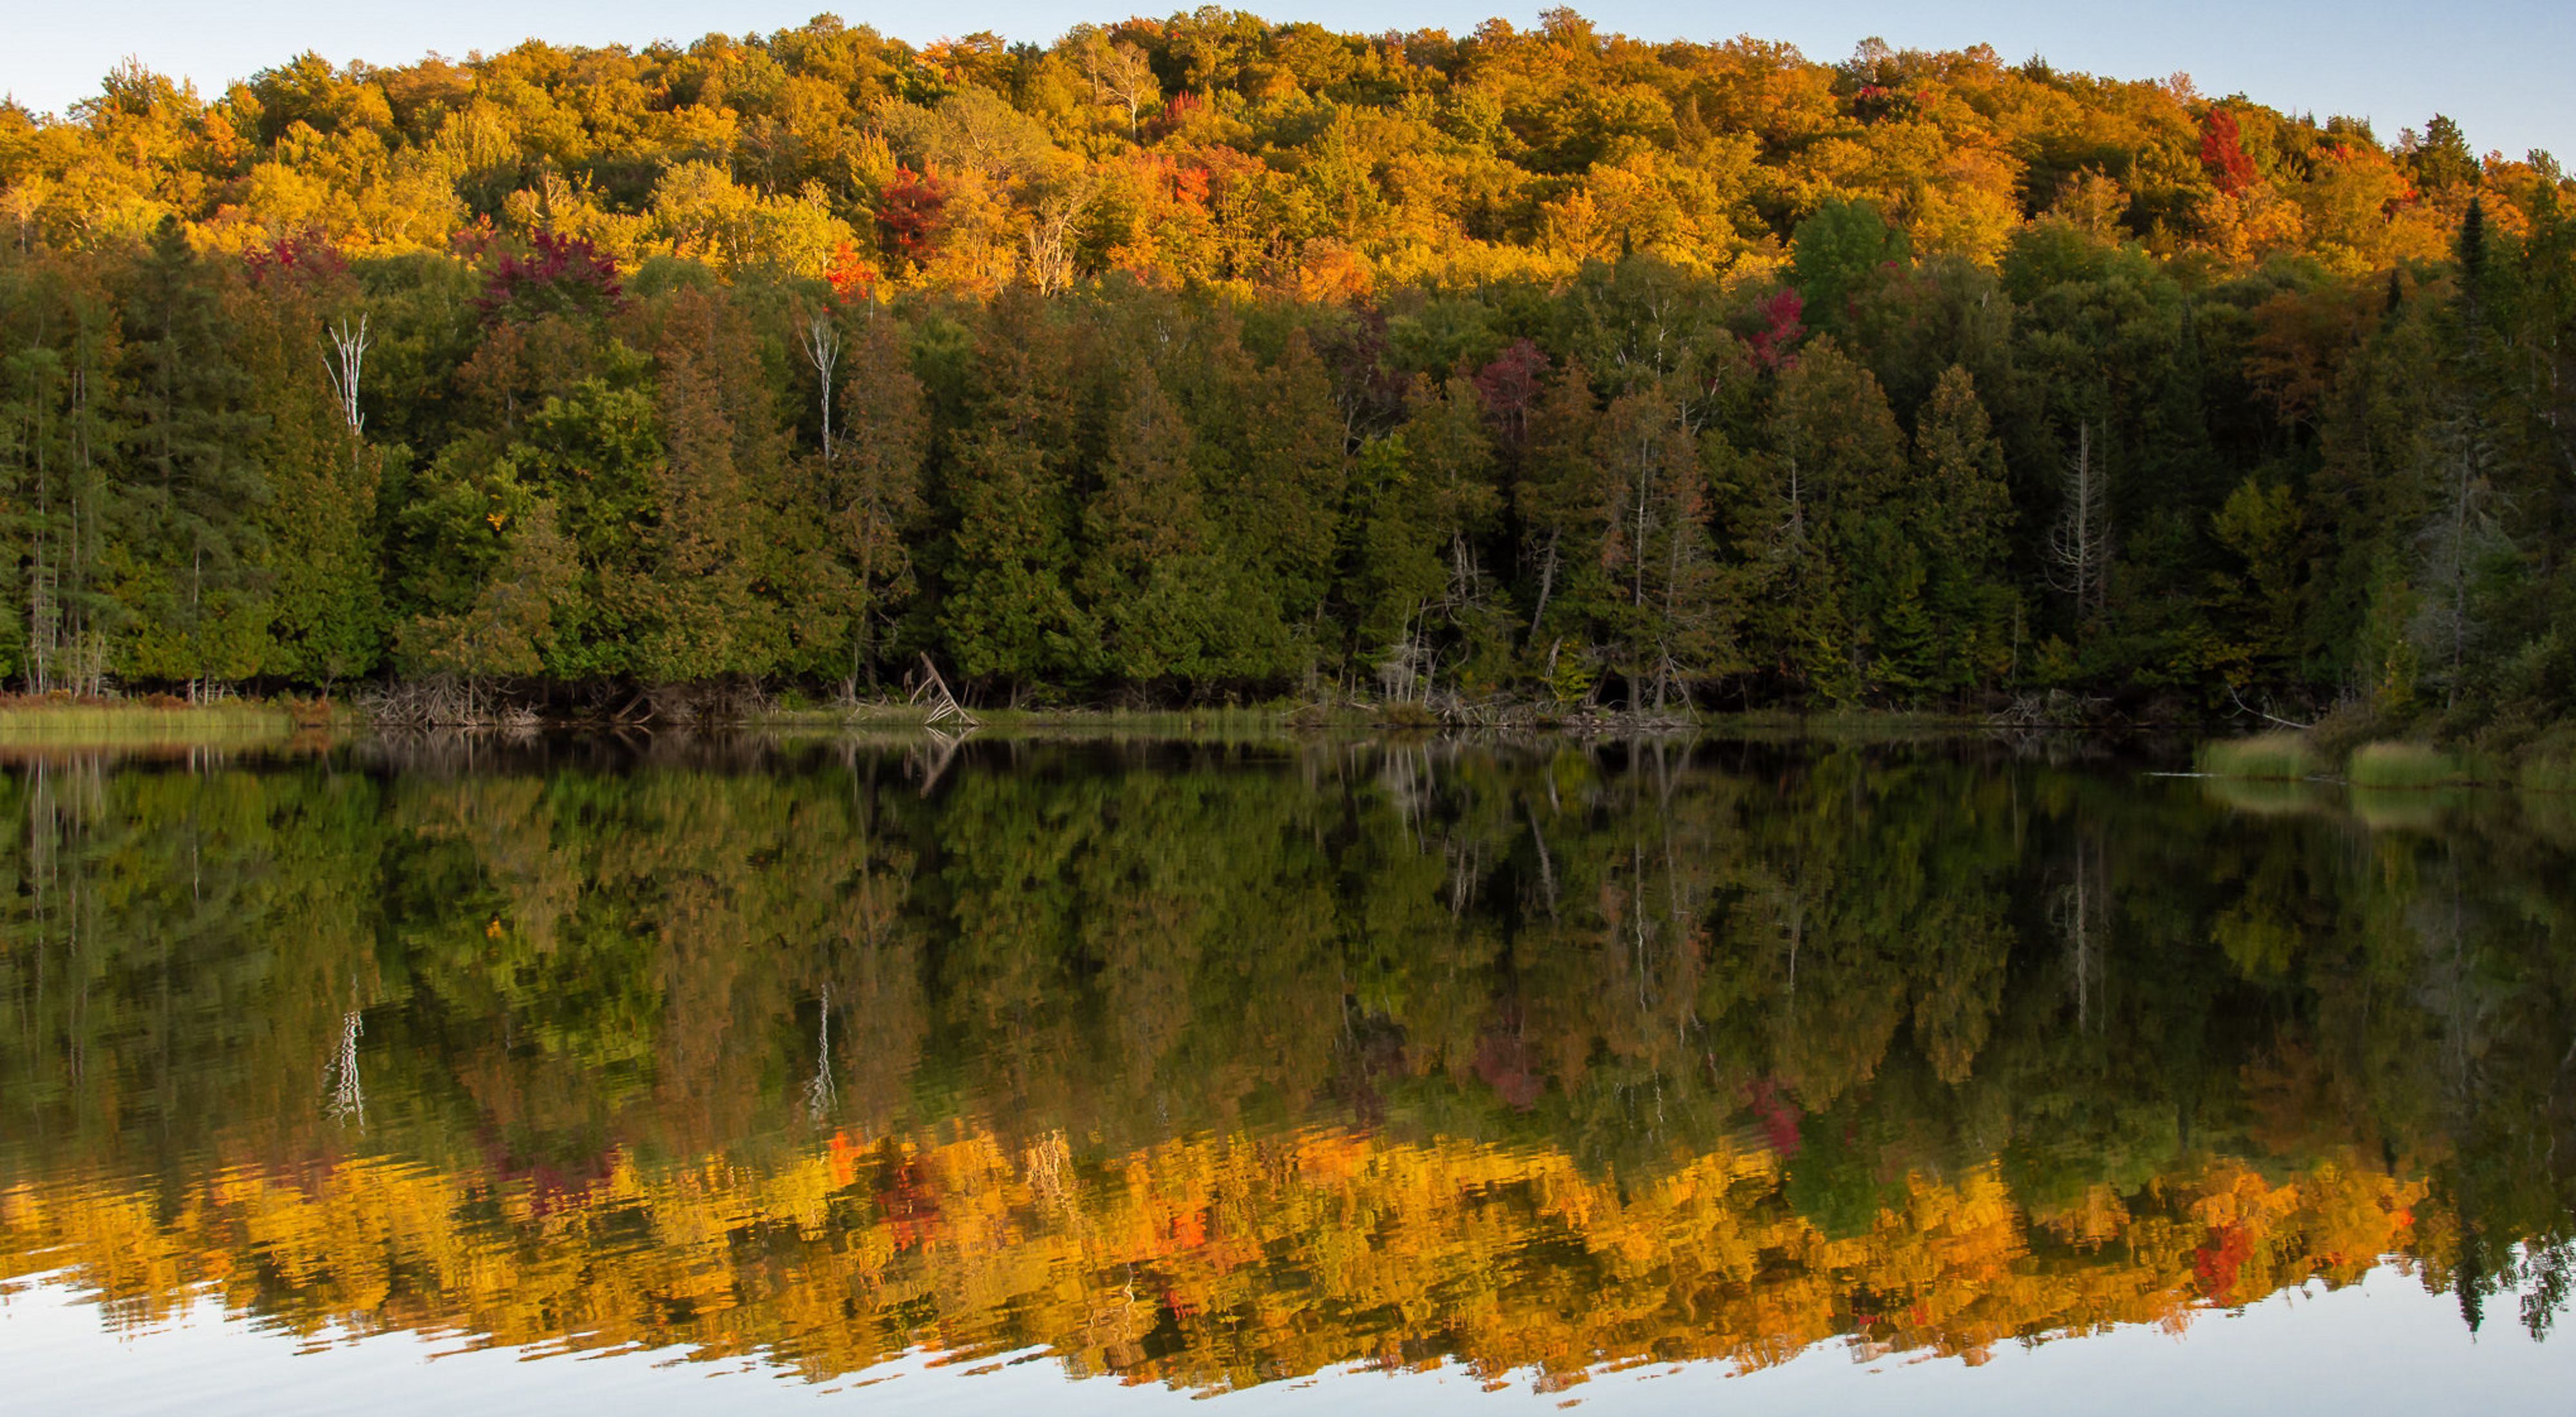 A forest of trees in full fall color are reflected like a mirror in a lake in the foreground.